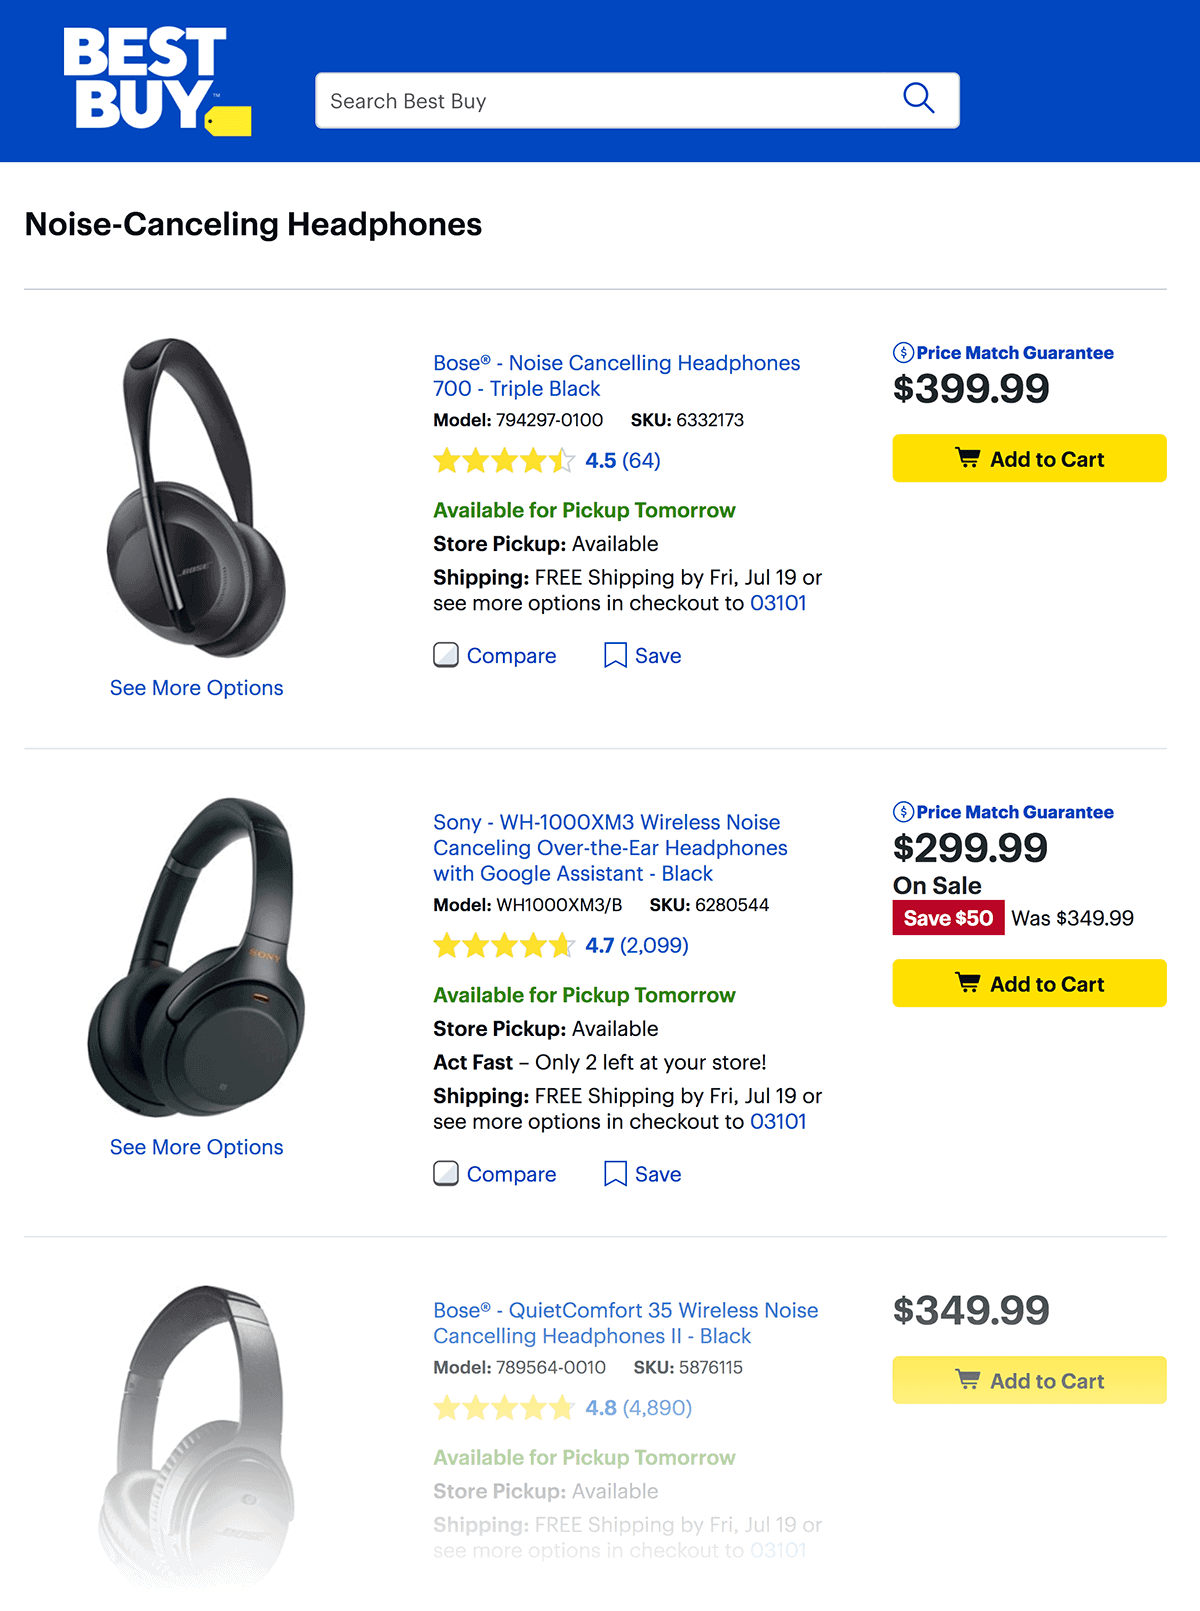 "noise canceling headphones" number one result